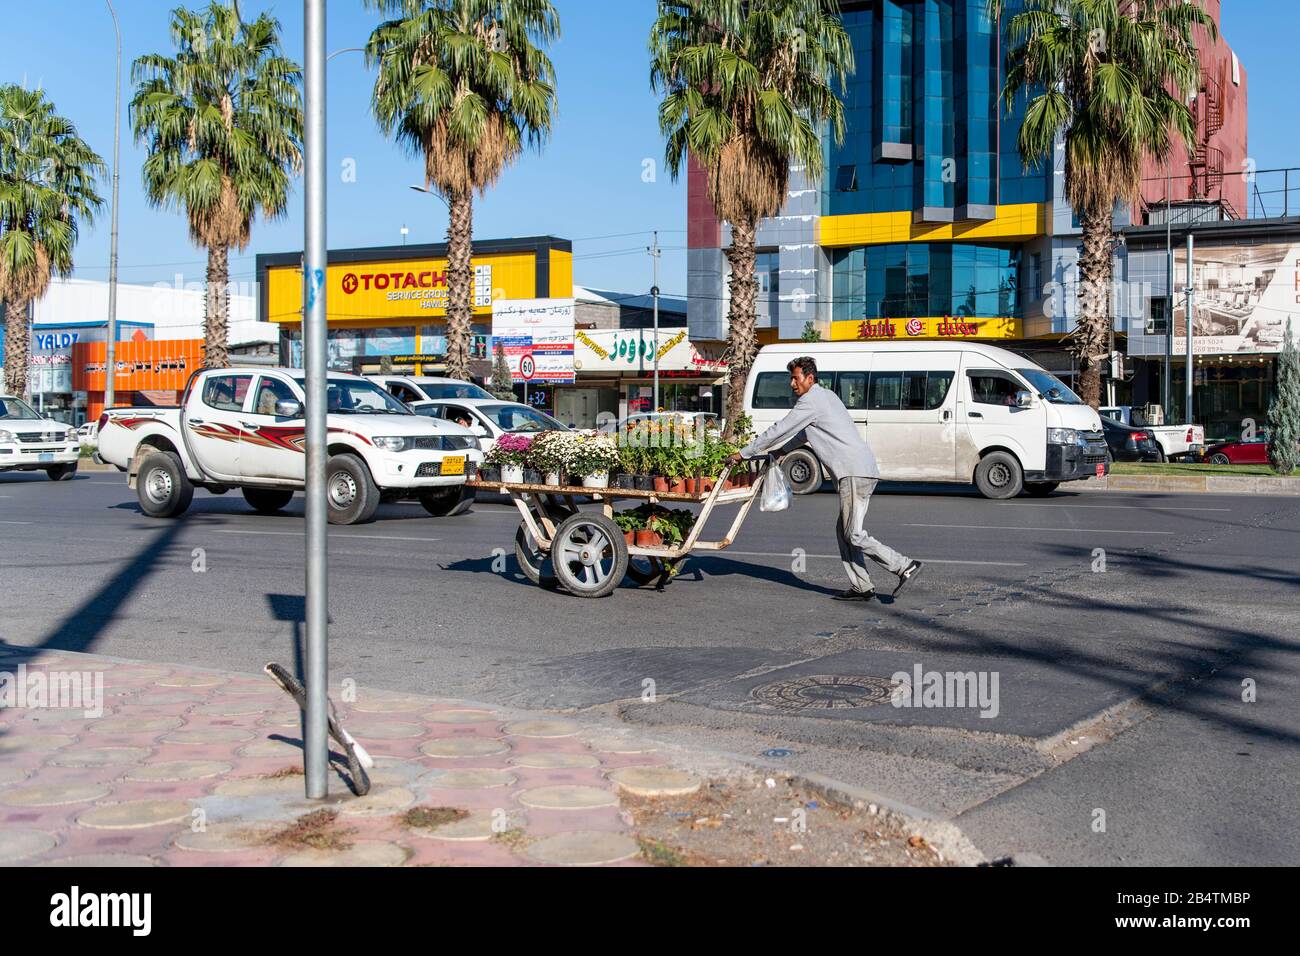 Iraq, Iraqi Kurdistan, Erbil. View of a crossroad. A man is walking in the opposite direction of the cars while pushing a trolley full of flowers Stock Photo